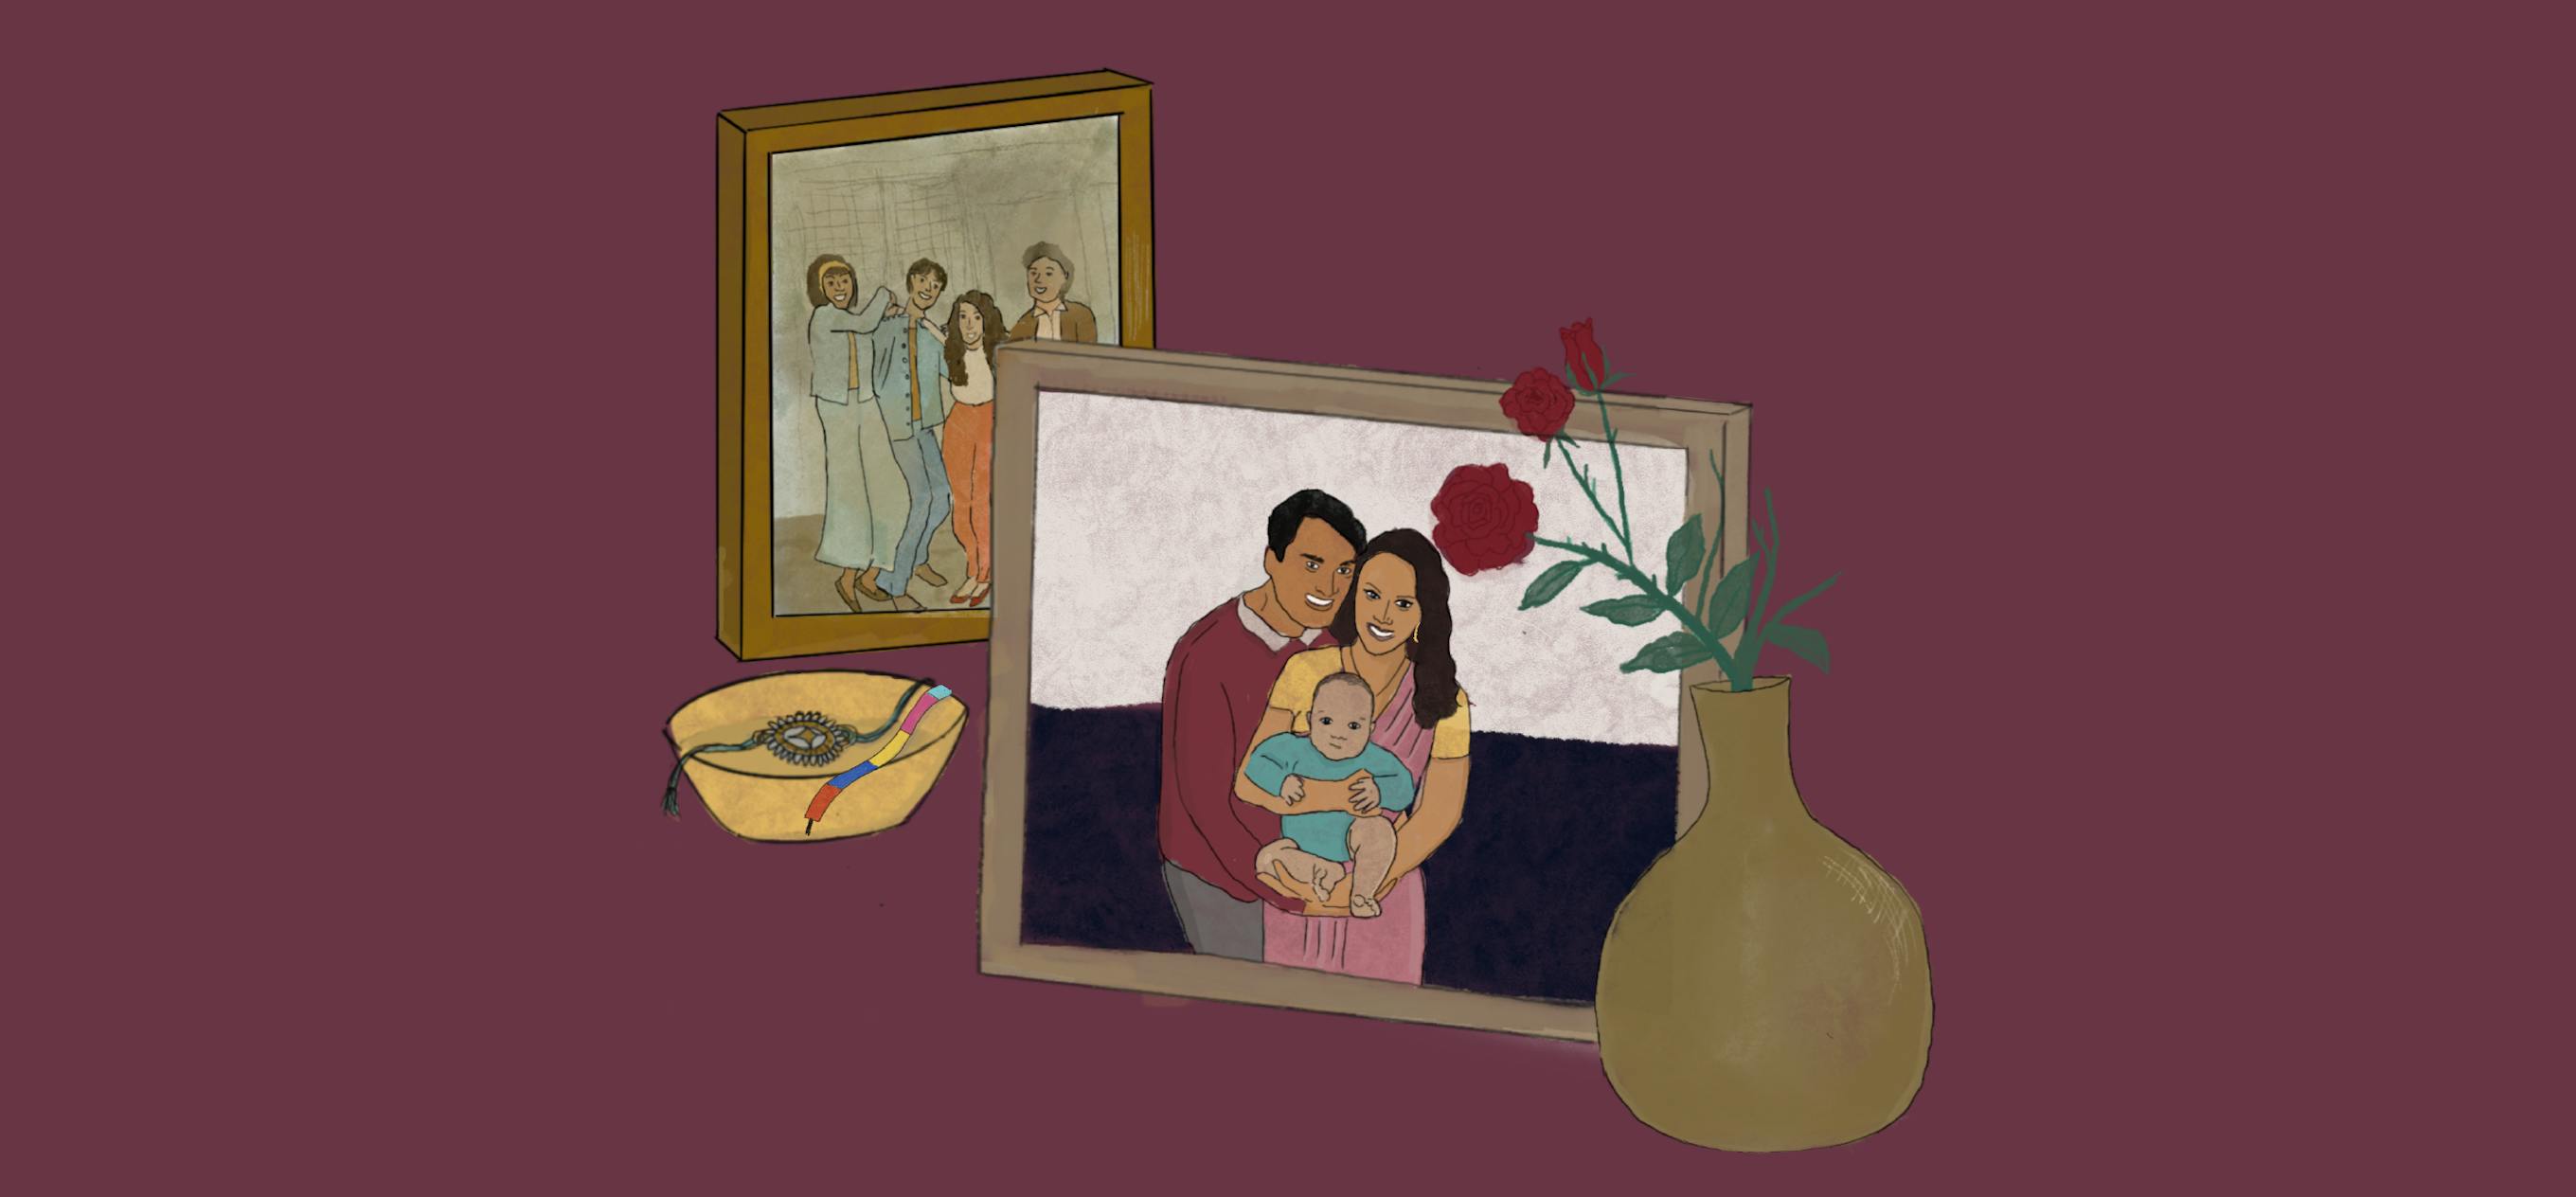 Platonic by Prachi Pinglay-Plumber; Illustration by Jerusha Isaac for FiftyTwo.in